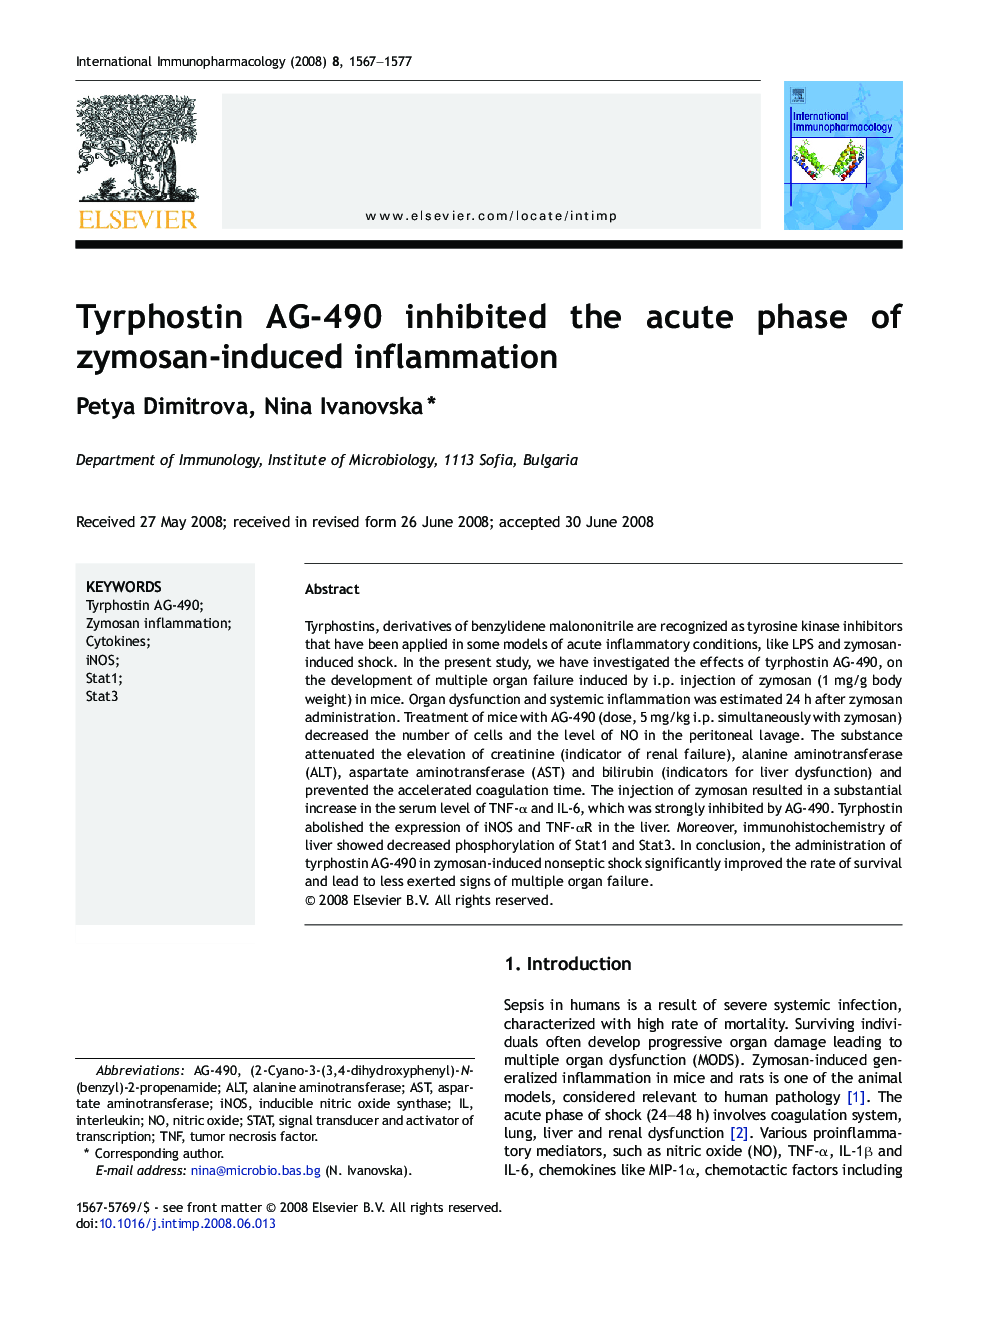 Tyrphostin AG-490 inhibited the acute phase of zymosan-induced inflammation